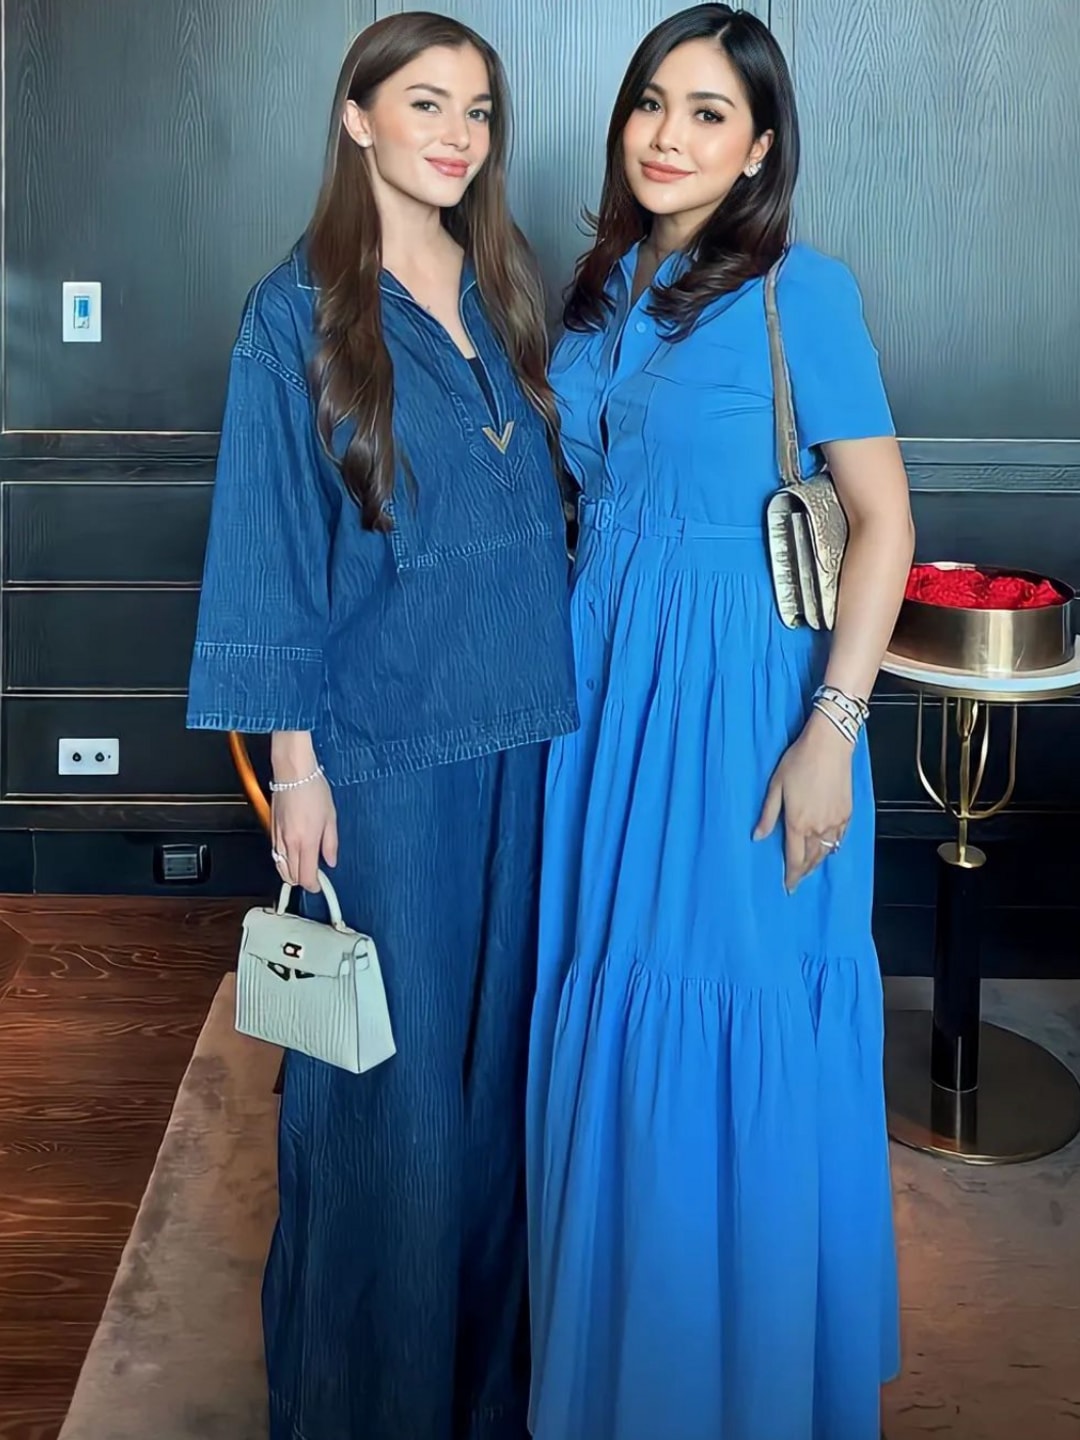 Princess Anisha poses with a friend in a double denim look with a mini white bag 